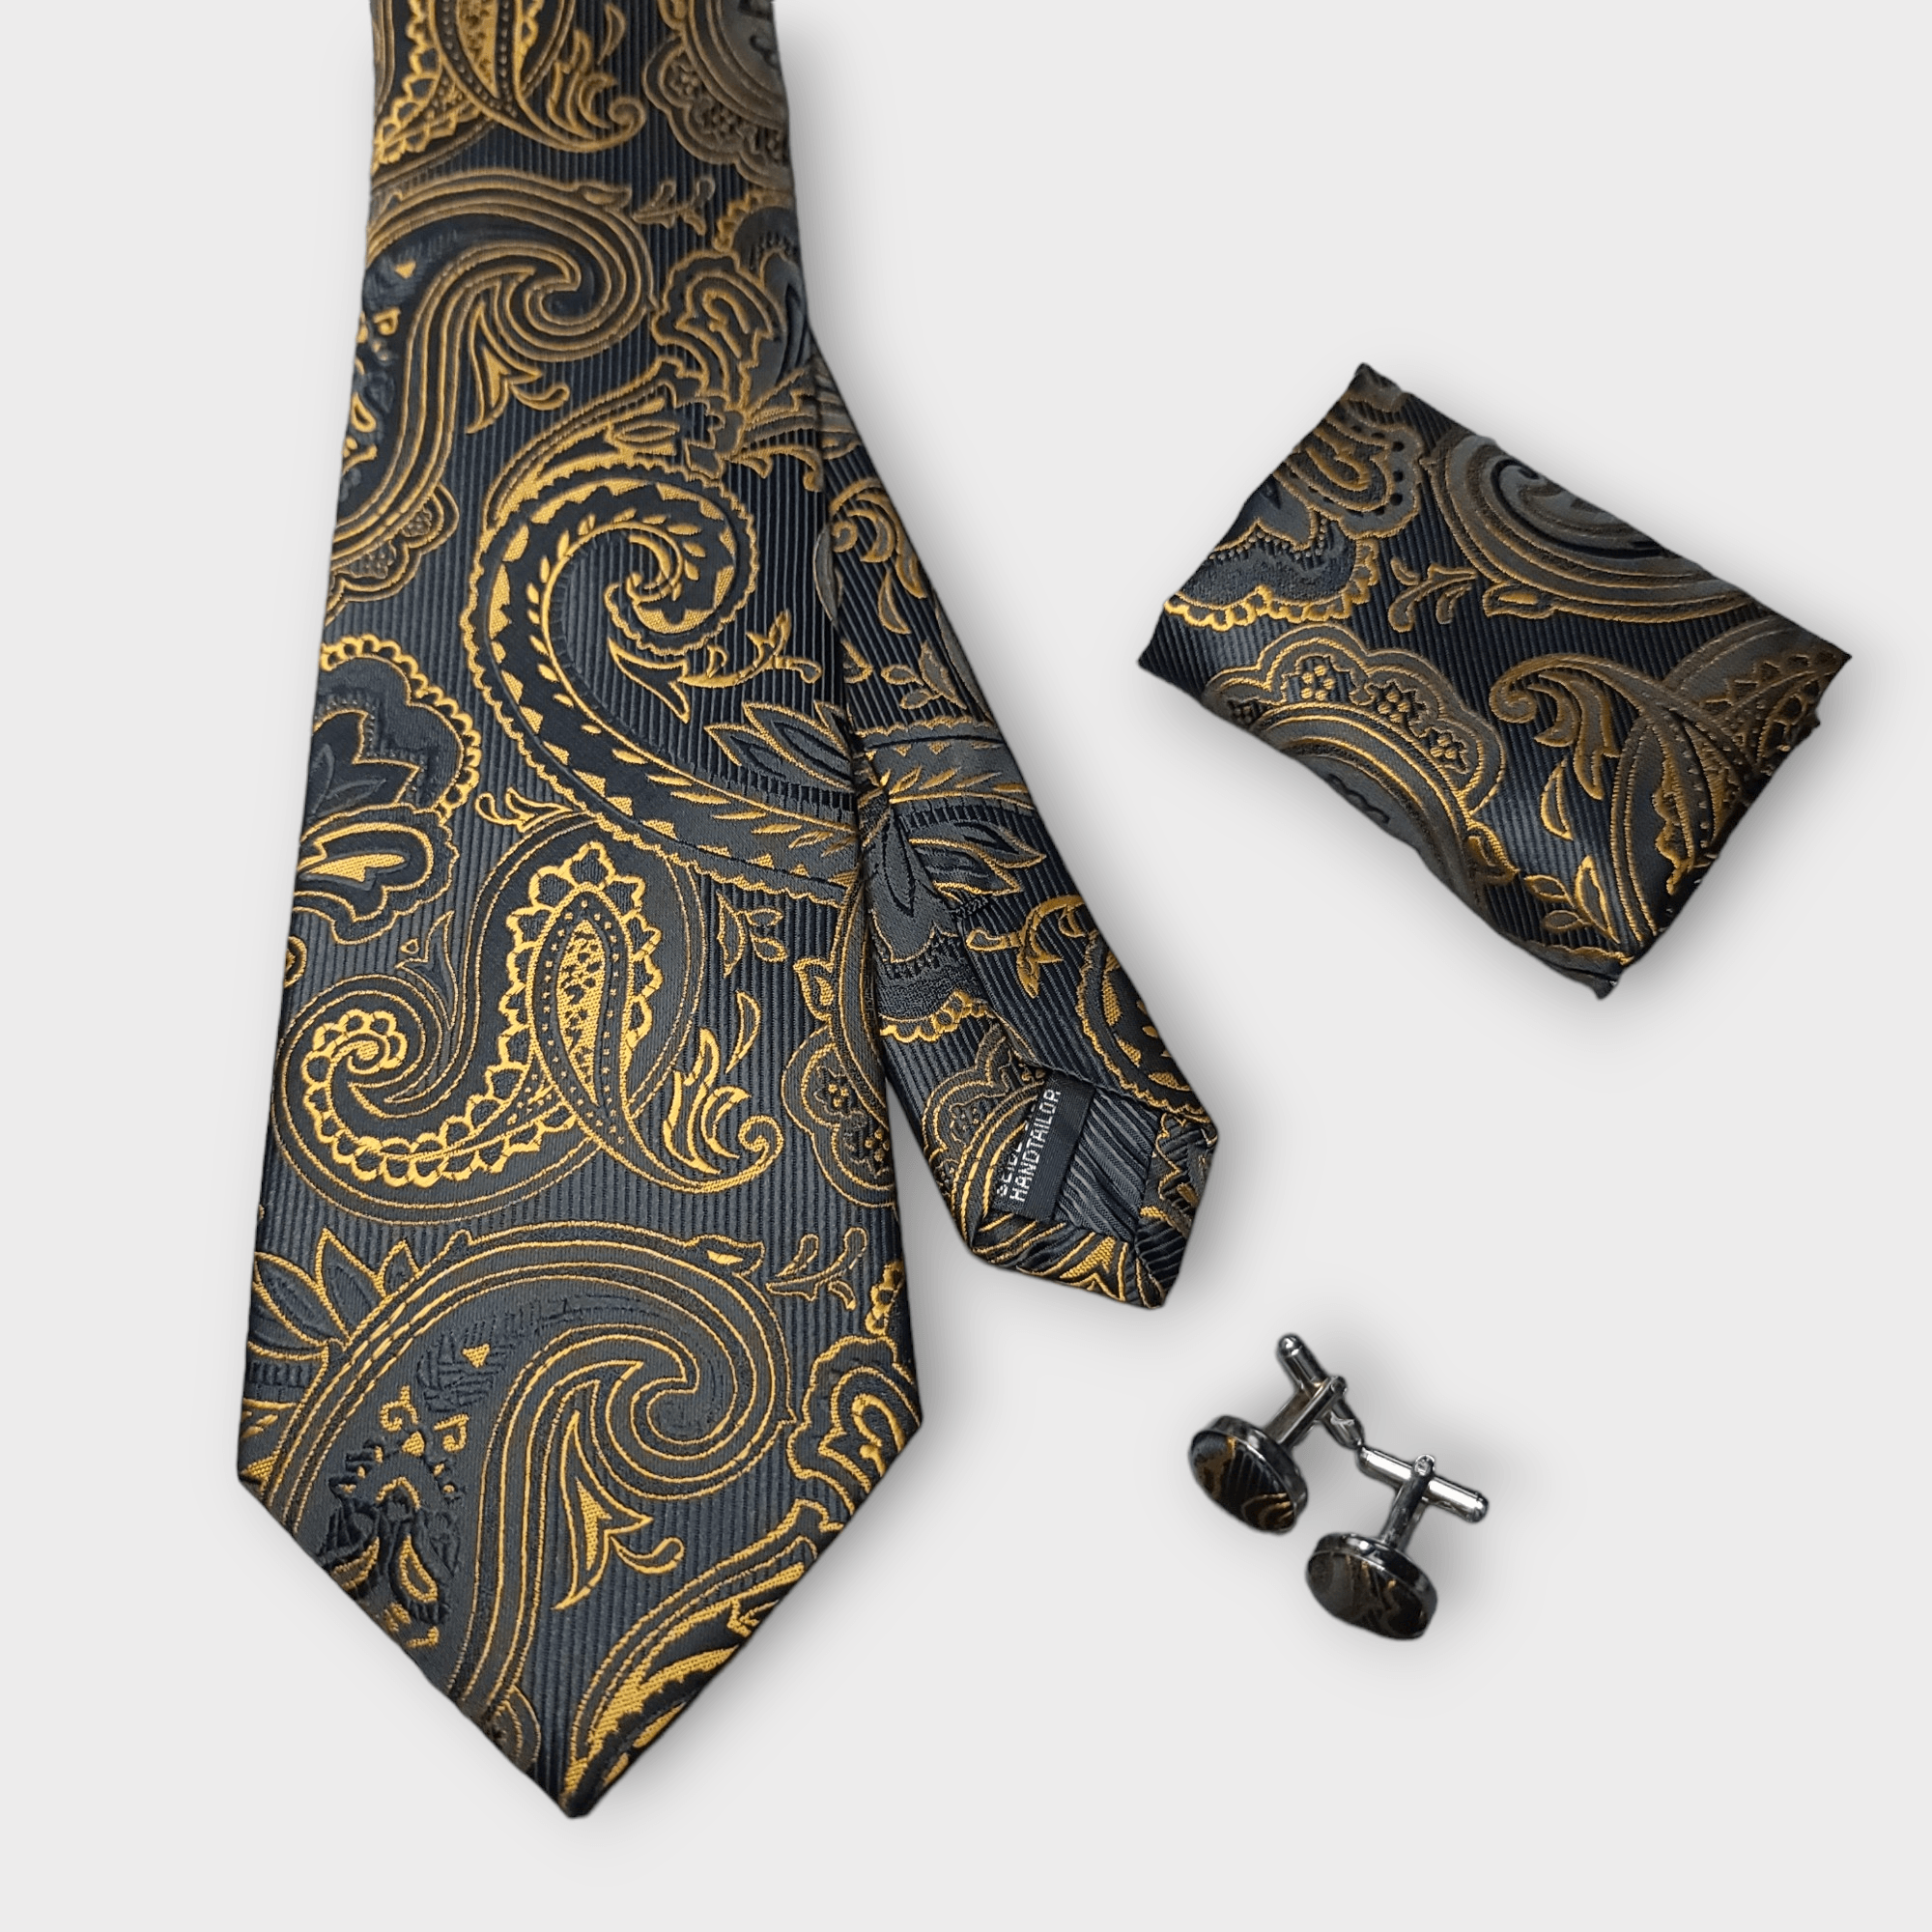 Extra Long Black Gold Paisley Tie Pocket Square Cufflink Set - STYLETIE